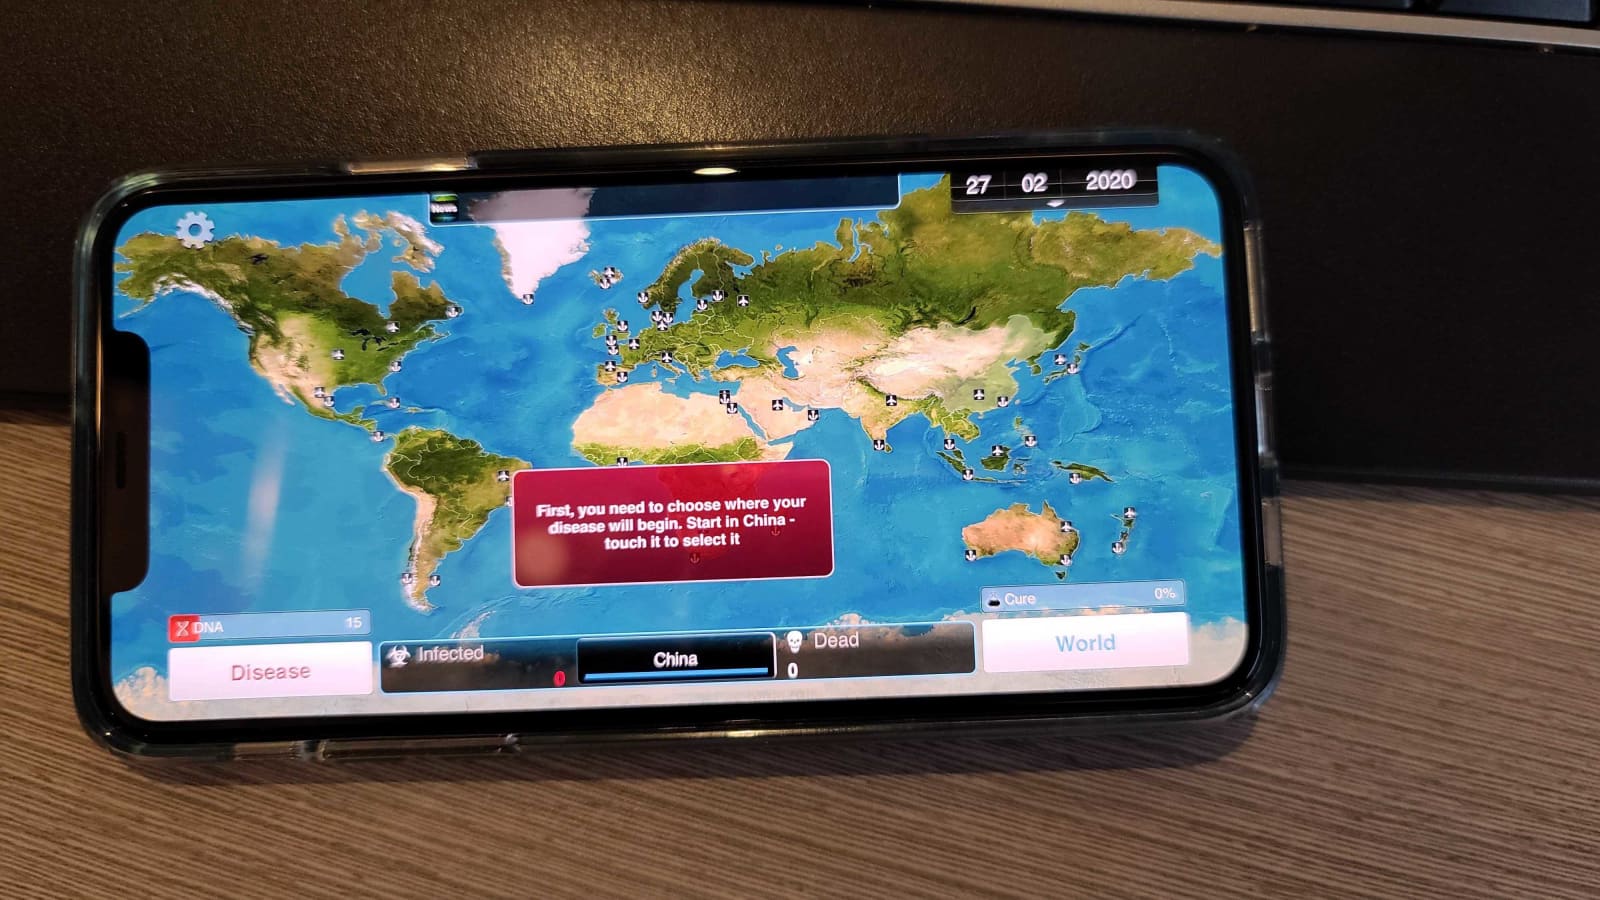 Plague Inc Removed From Apple App Store In China